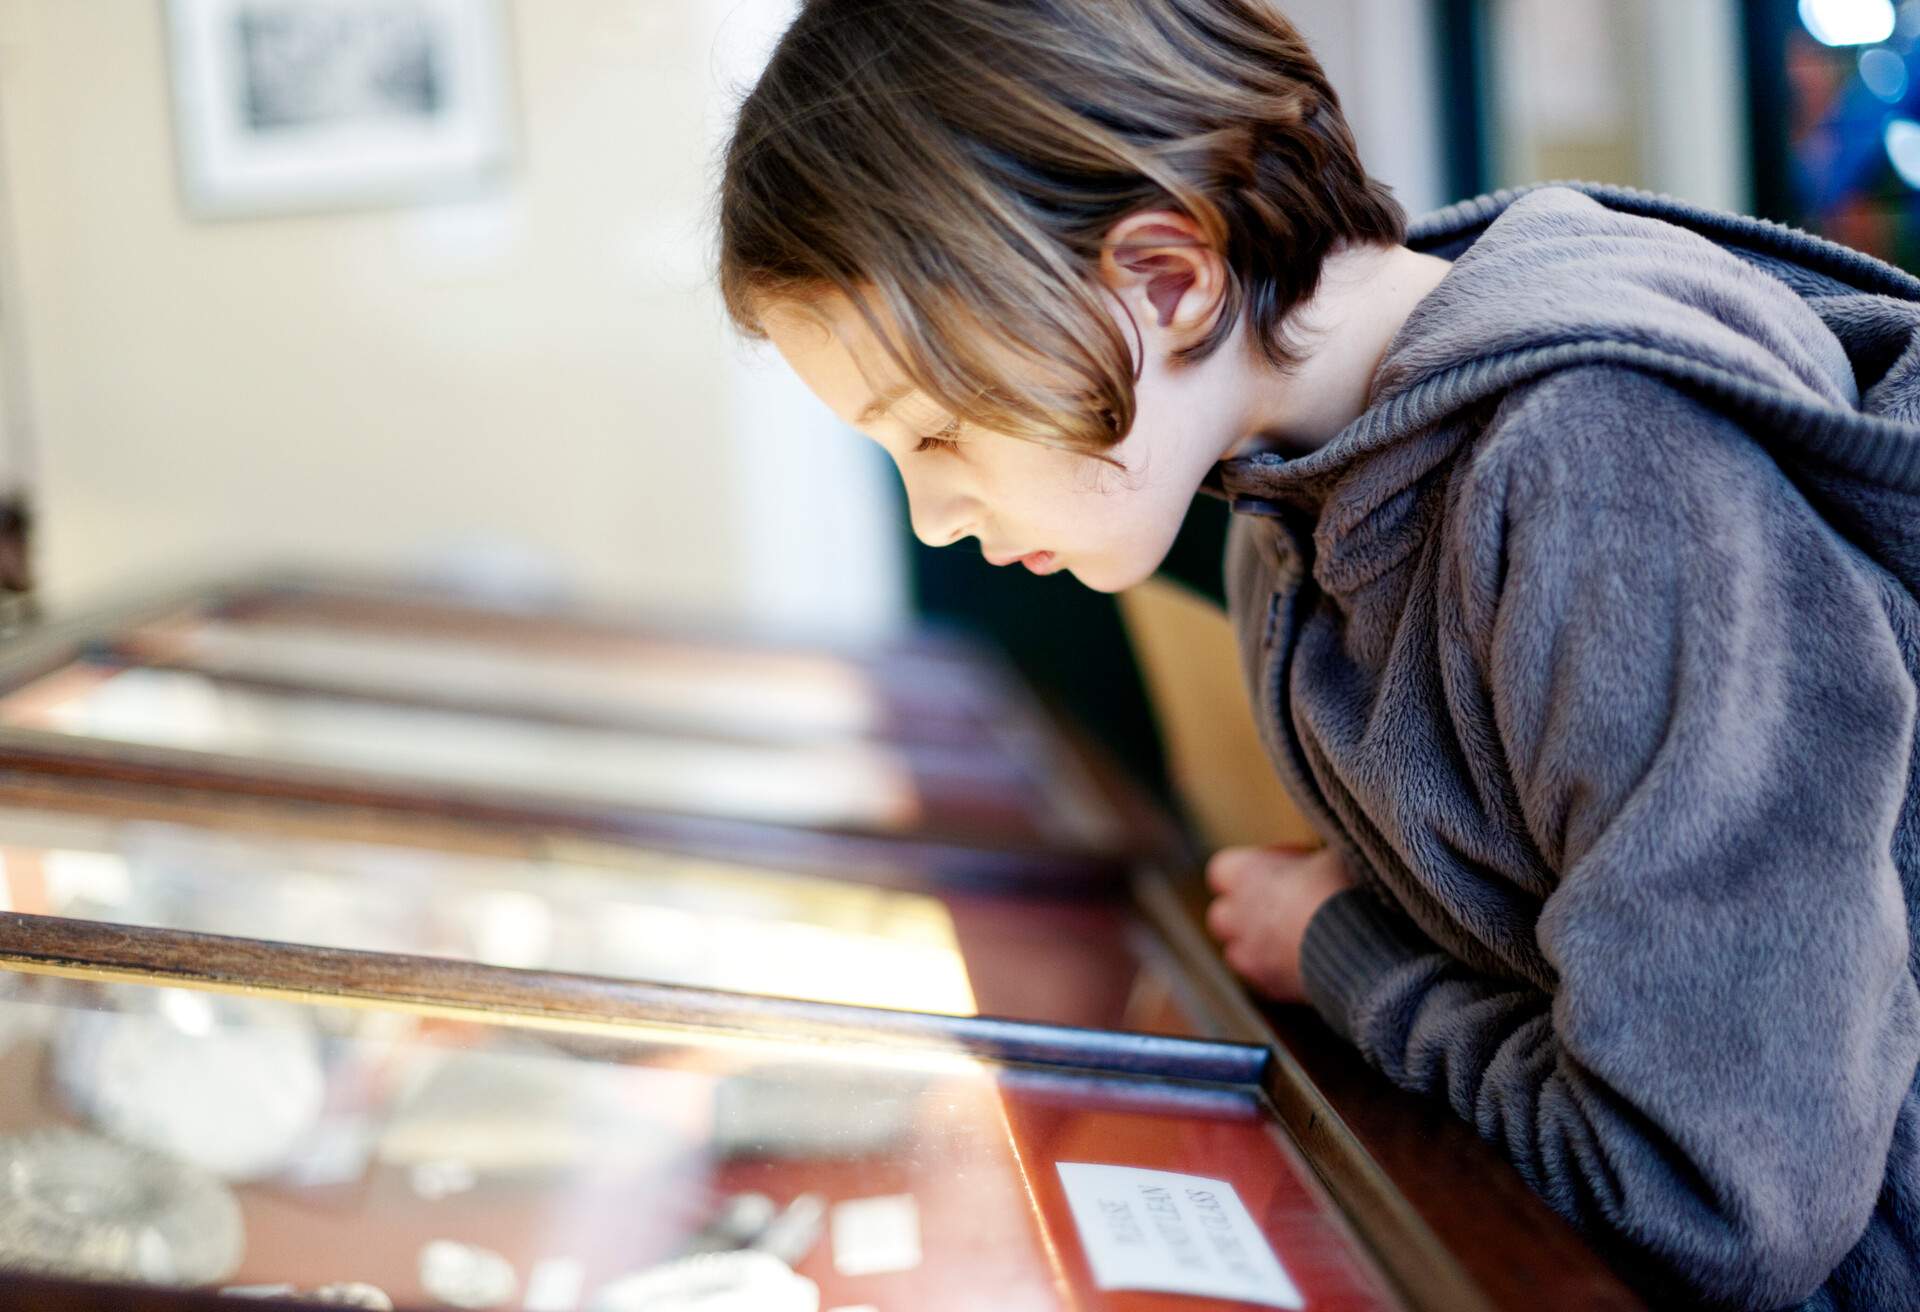 A young female child looking at a tabletop glass display.